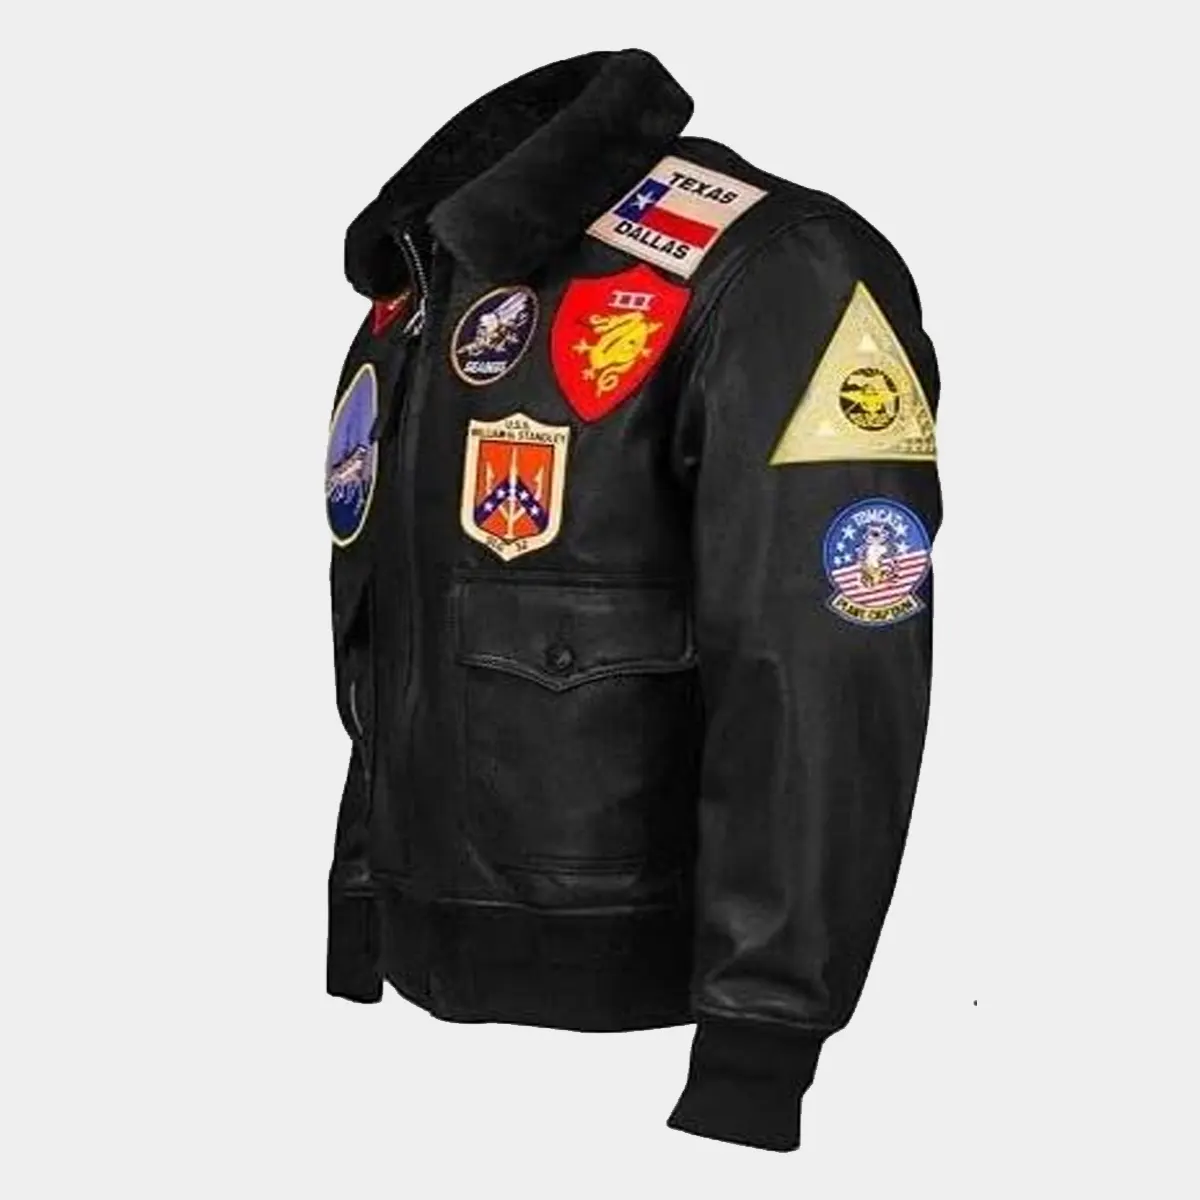 Men’s G1 Bomber Maverick Aviator Real Leather Fur Collar Flight Jacket with Embroidery Patches Maverick Bomber Jacket Men